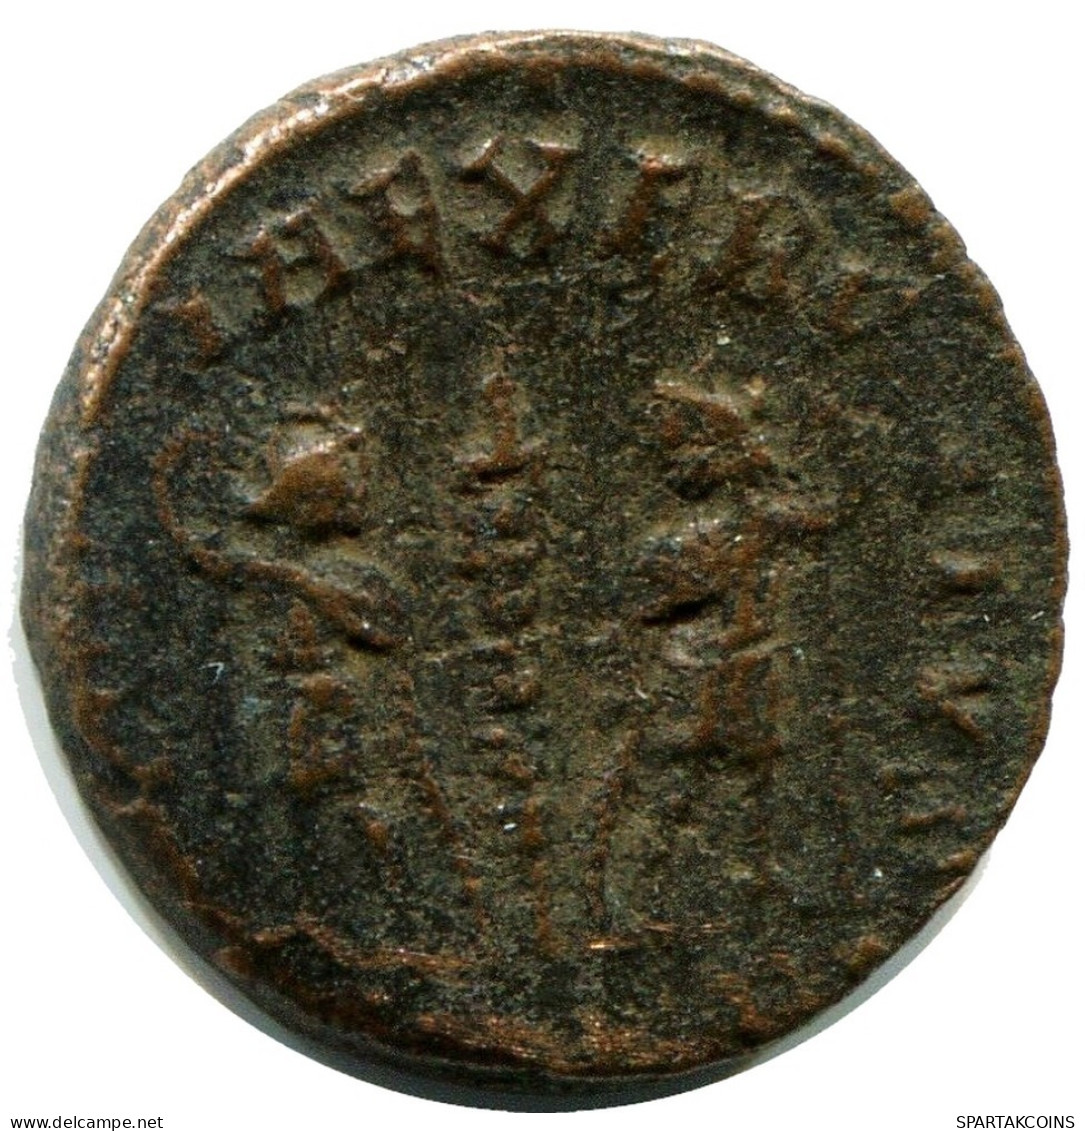 CONSTANS MINTED IN CYZICUS FROM THE ROYAL ONTARIO MUSEUM #ANC11640.14.E.A - L'Empire Chrétien (307 à 363)